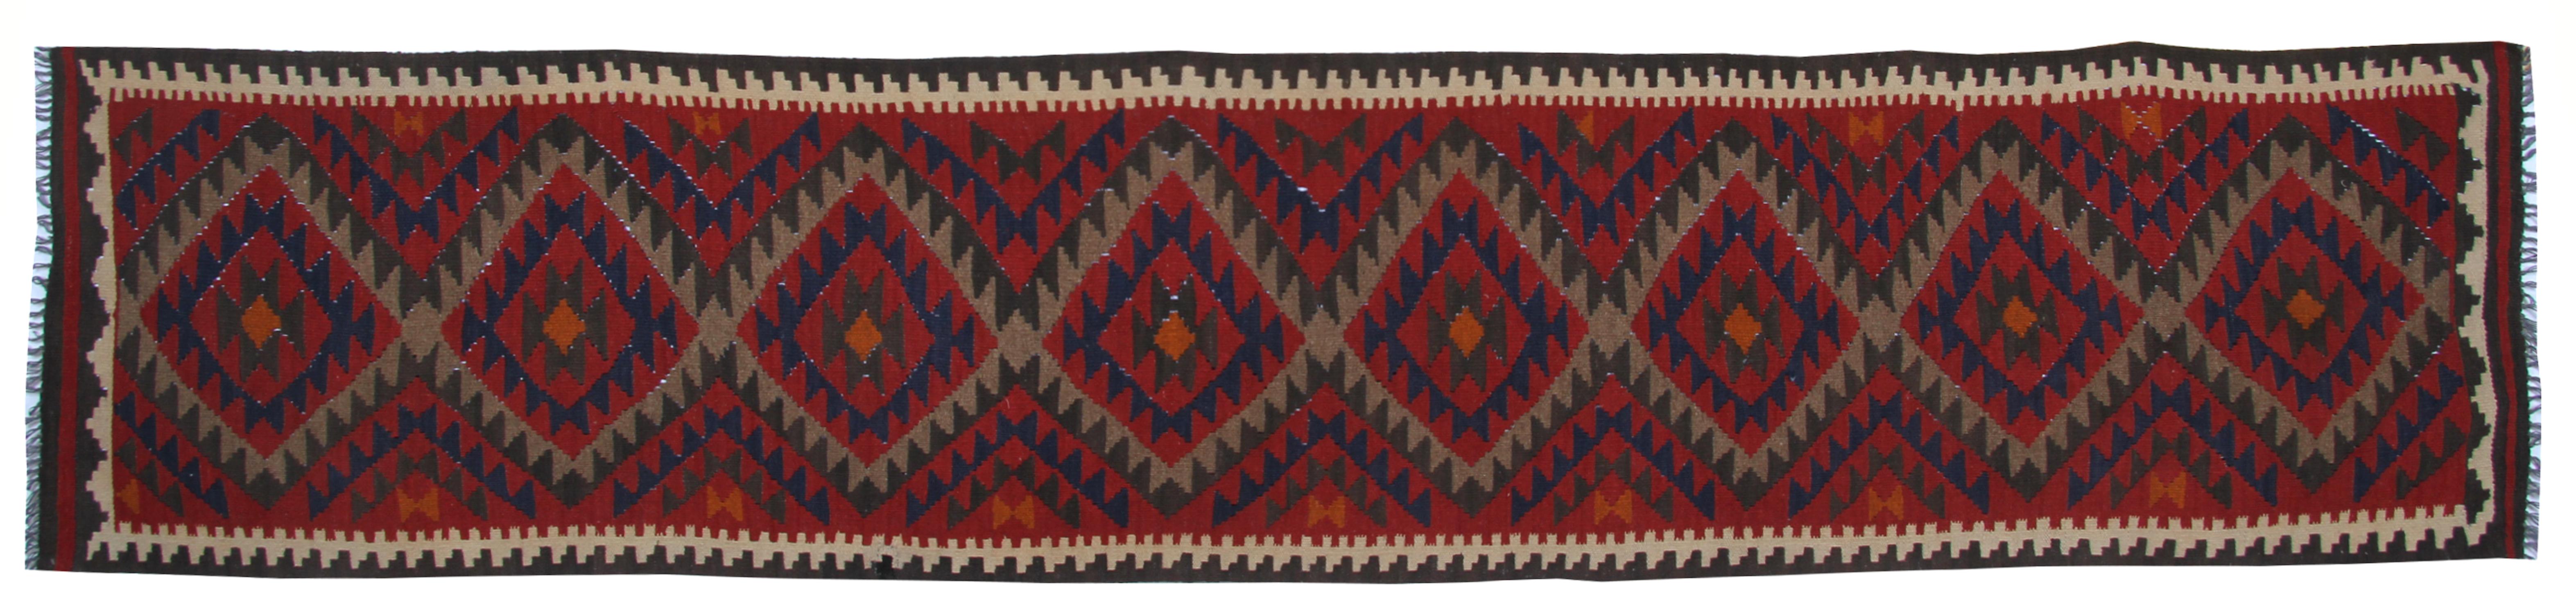 This handwoven vintage Kilim runner rug features a repeat geometric pattern. This piece features a traditional colour palette of predominantly red, blue, beige, and brown. Designed with a traditional Afghan pattern. Woven with the finest hand-spun